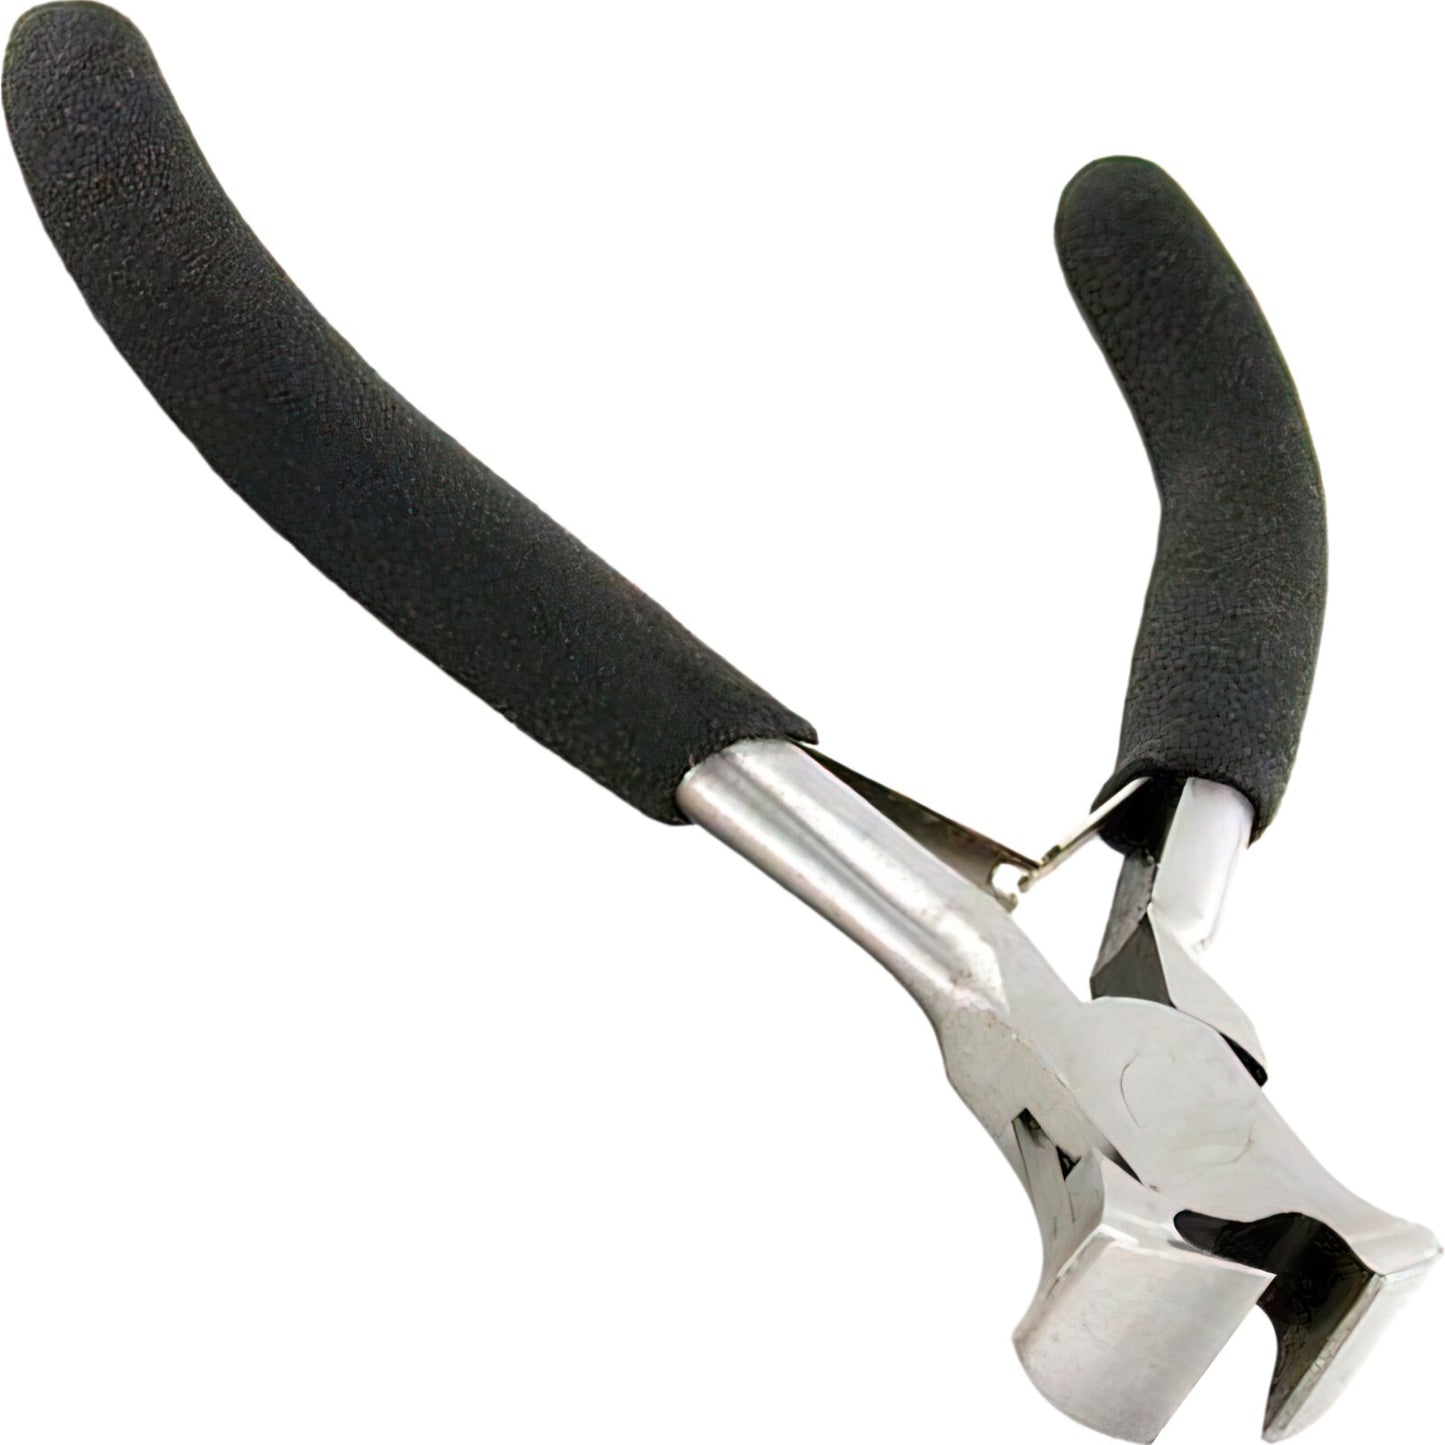 End Cutting Pliers 4 1/2"